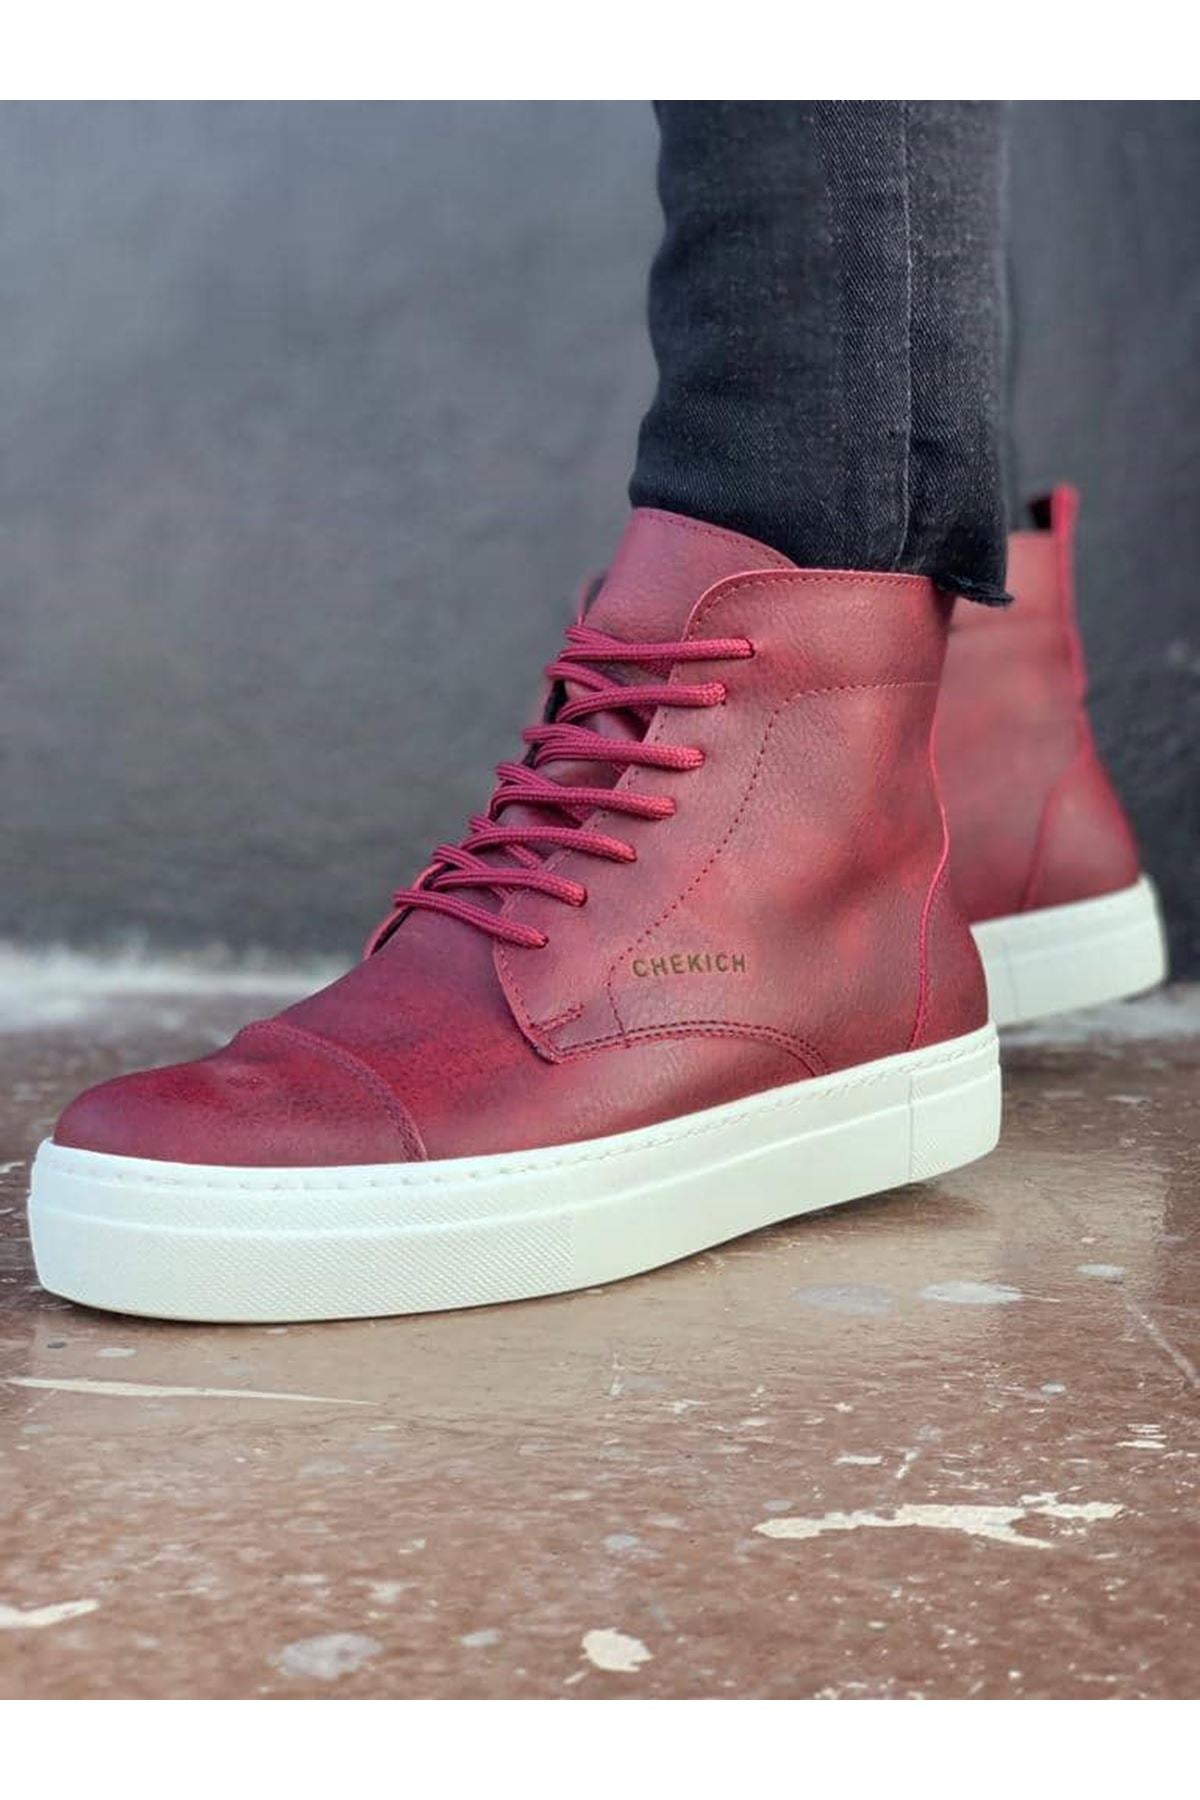 CH029 Men's Burgundy Casual Sneaker Boots - STREETMODE ™